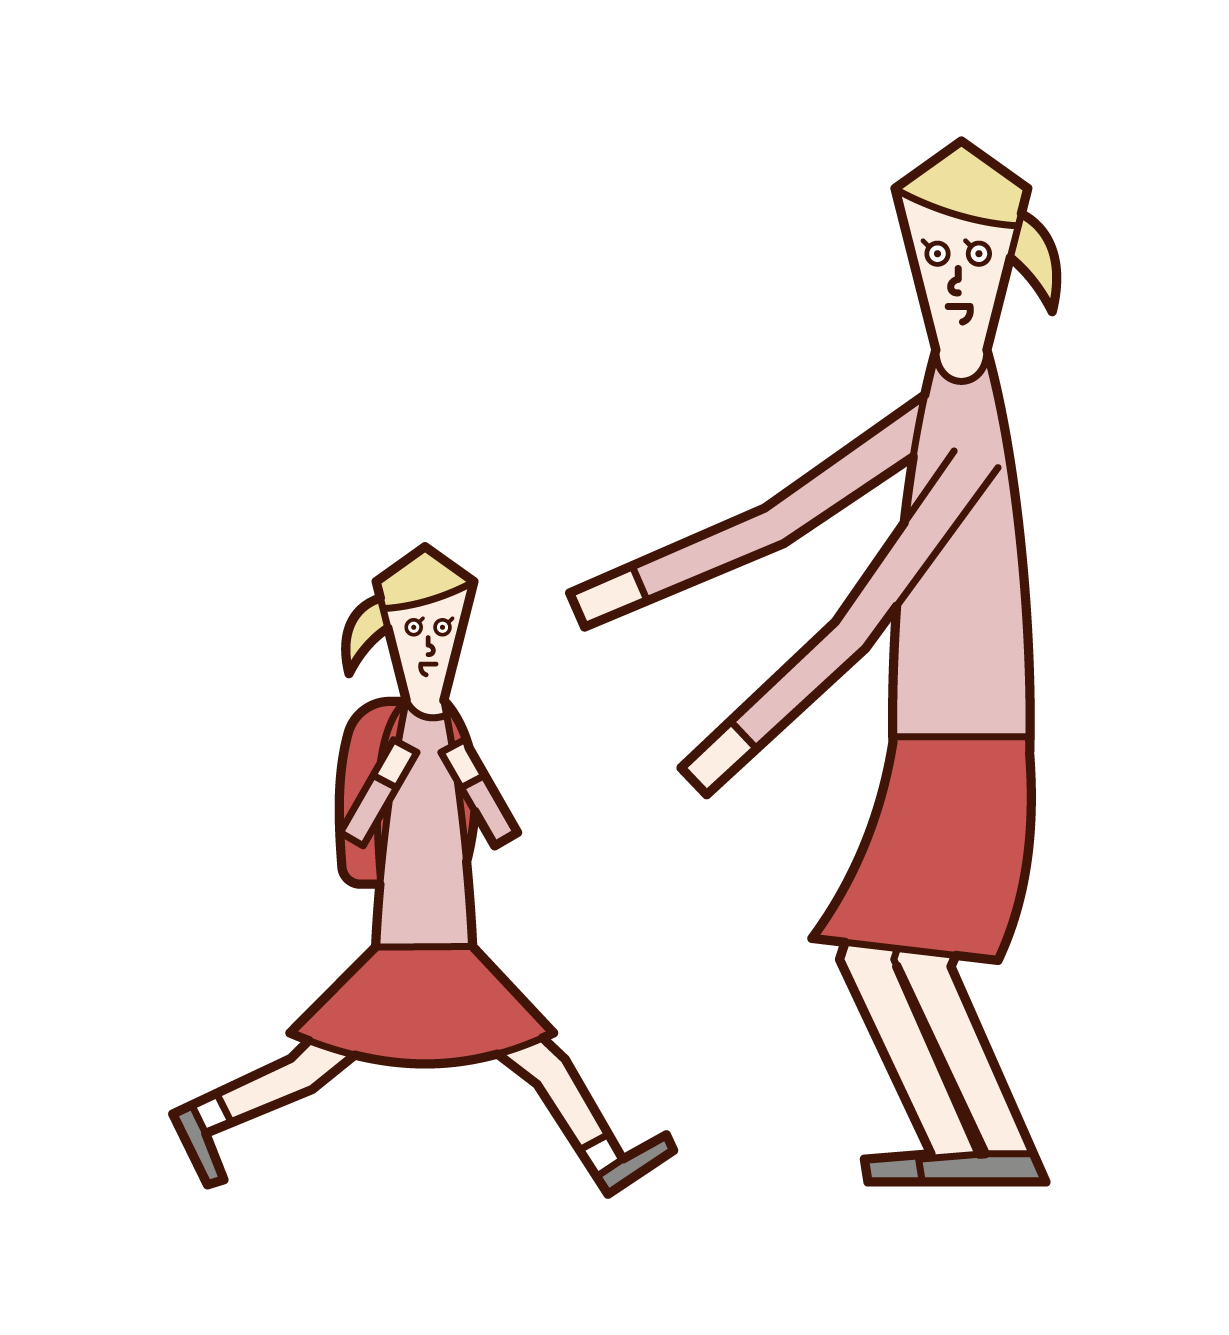 Illustration of a mother greeting her child (daughter)